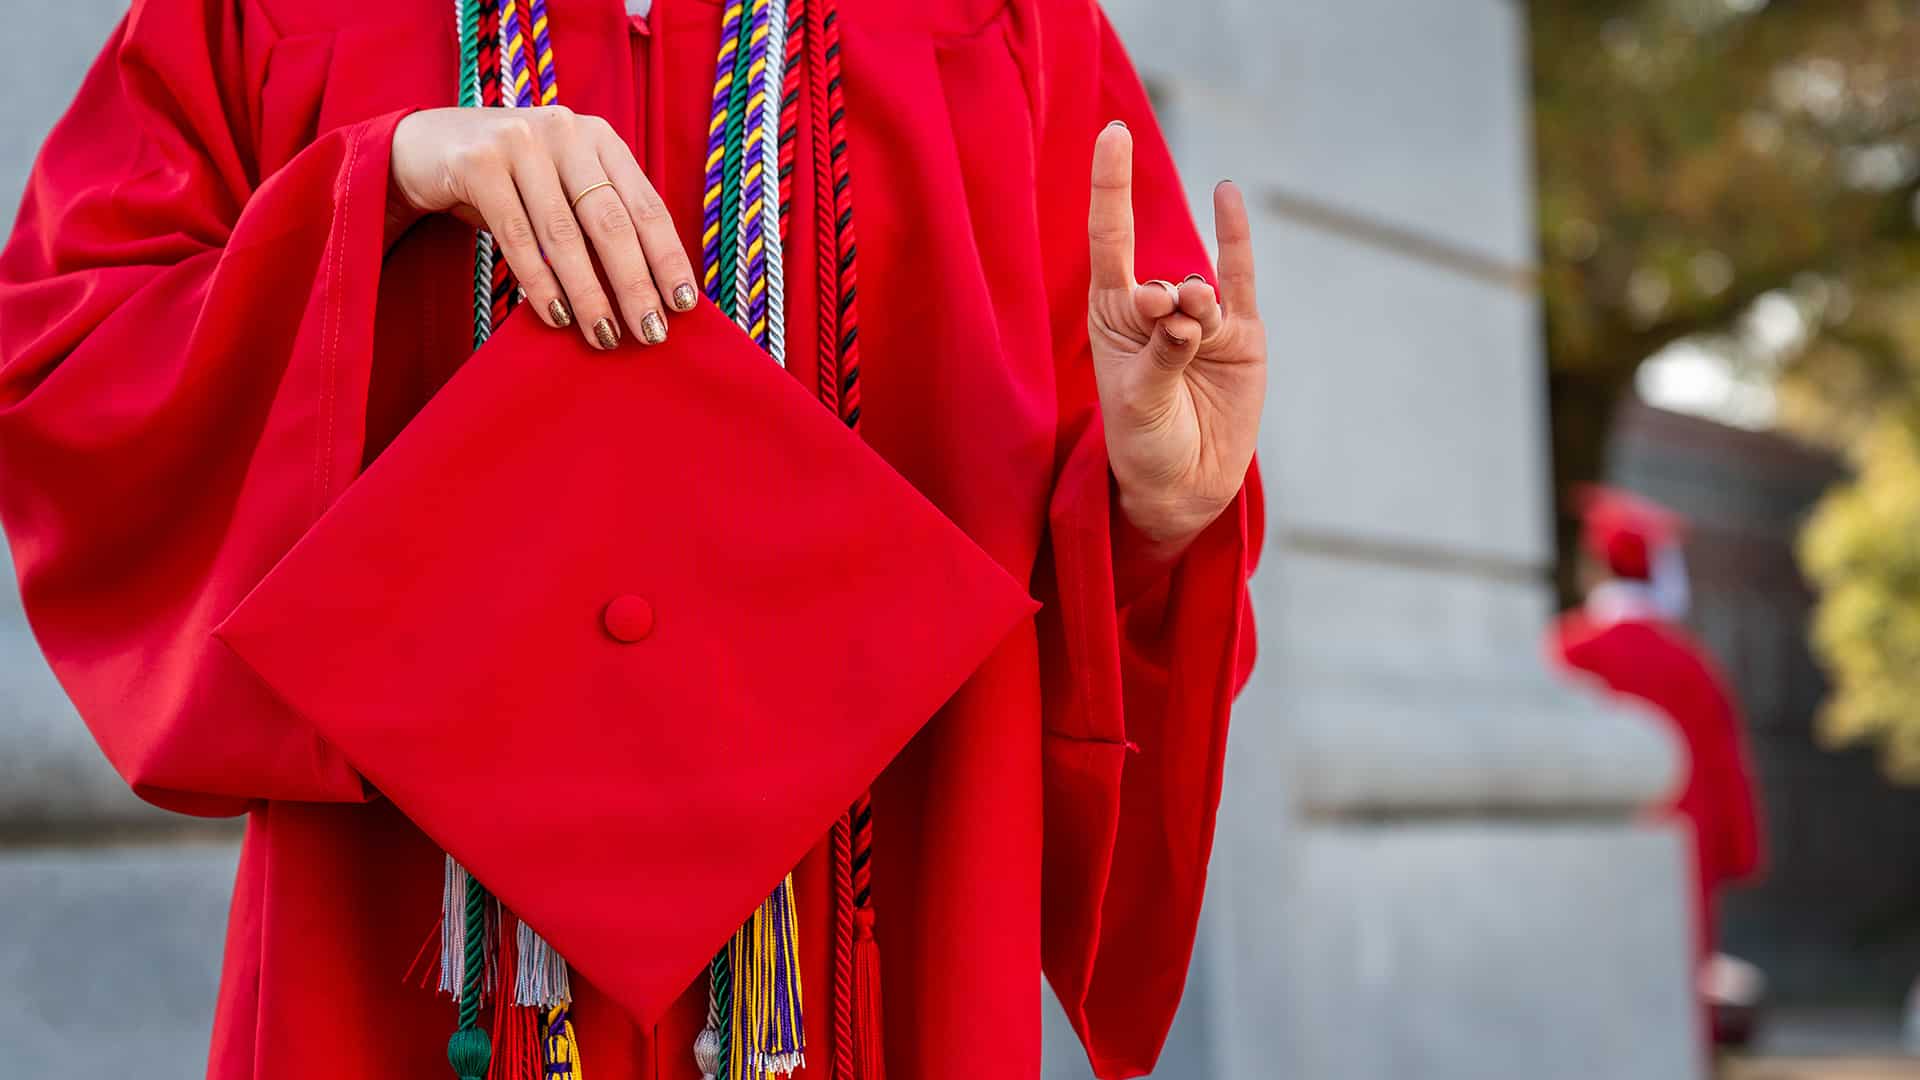 A student holds up wolfies and a red graduation cap.